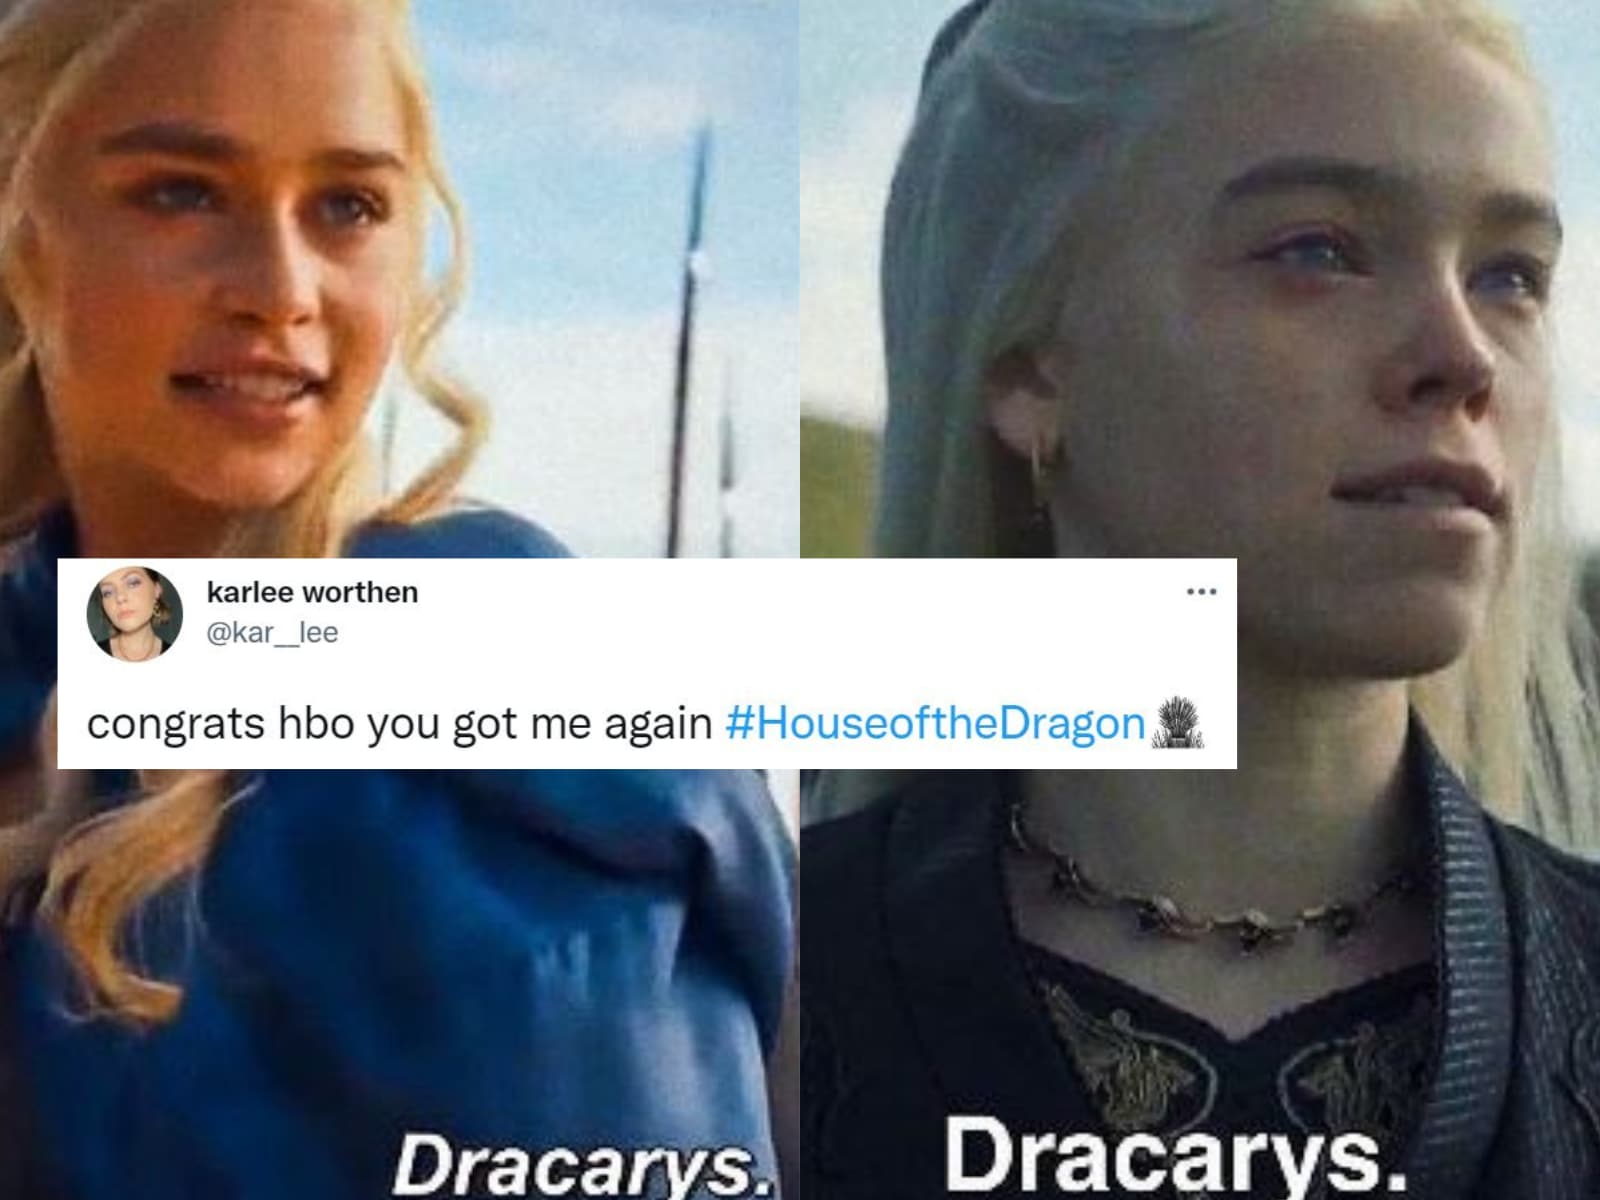 House of the Dragon & Game of Thrones Memes (@thronesmemes) • Instagram  photos and videos